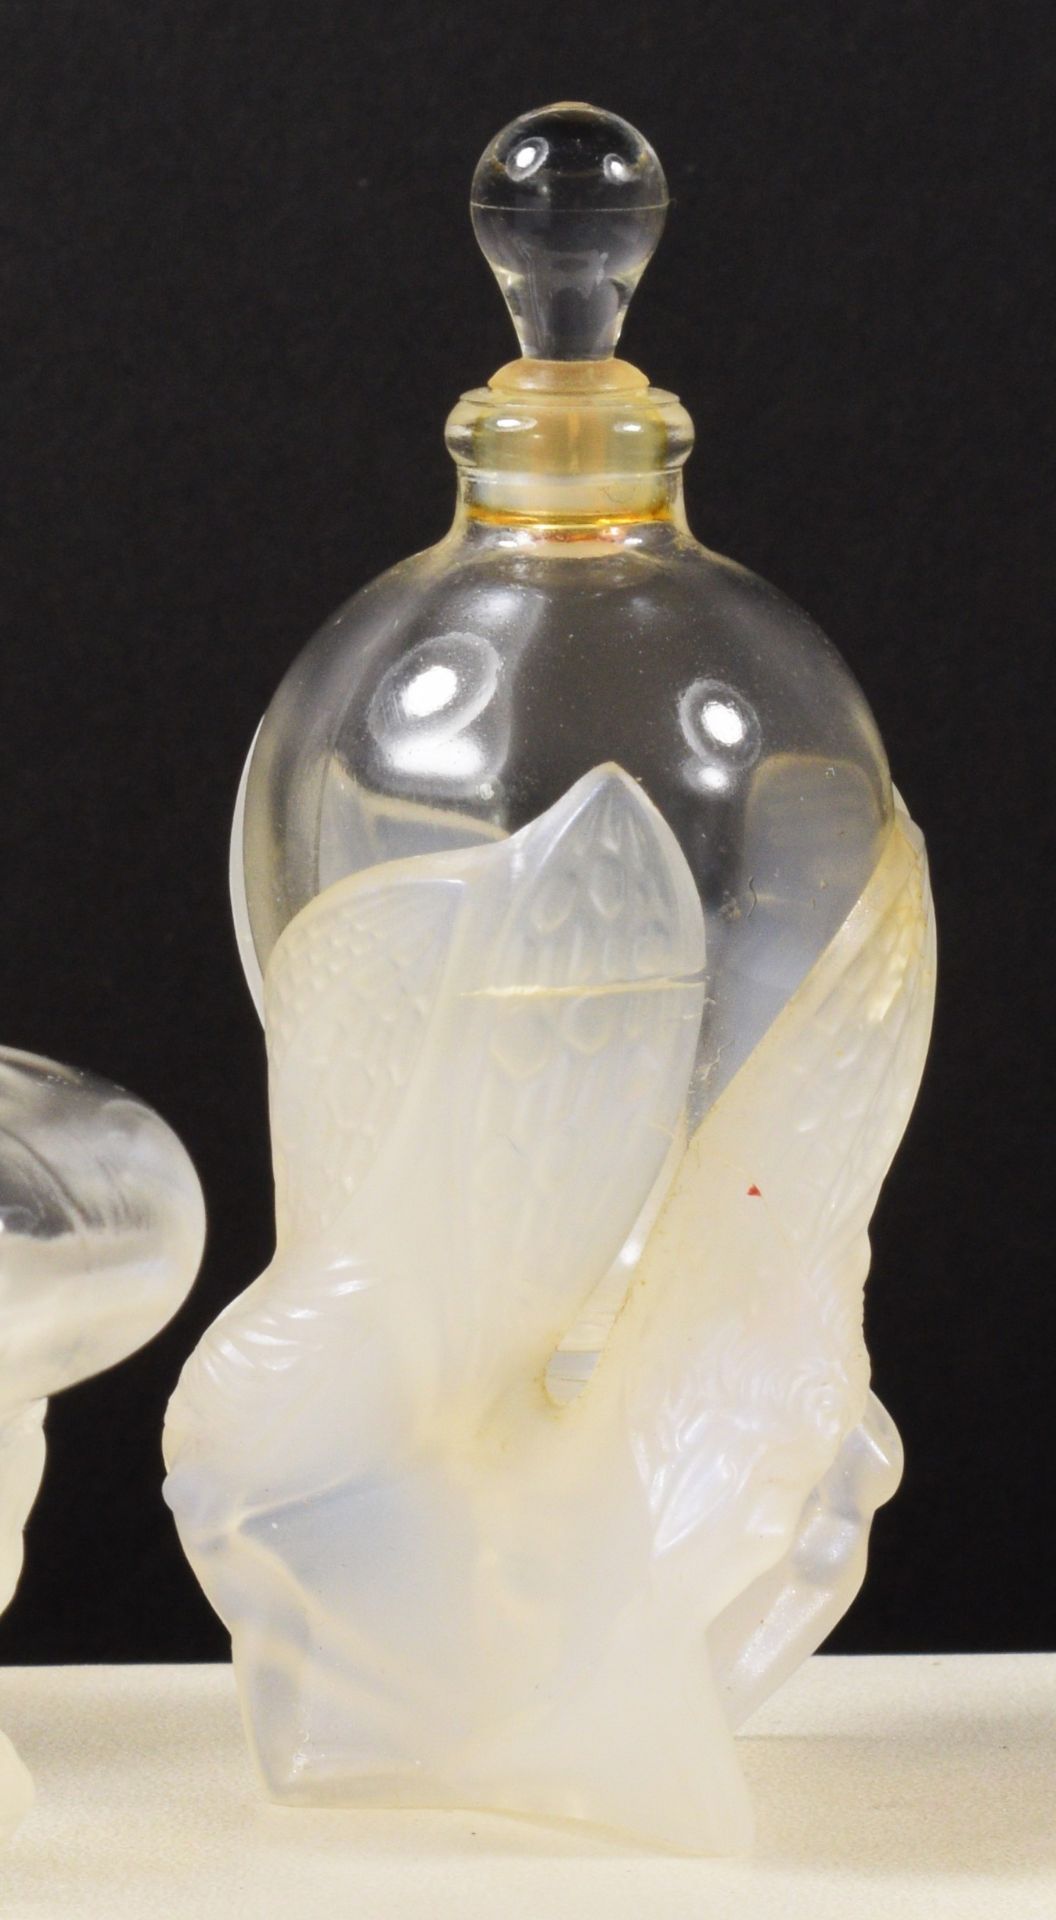 Lalique "Les Flacons Miniatures", perfume bottles, 1998, 1999, 2000 edition, cased with display card - Image 7 of 9